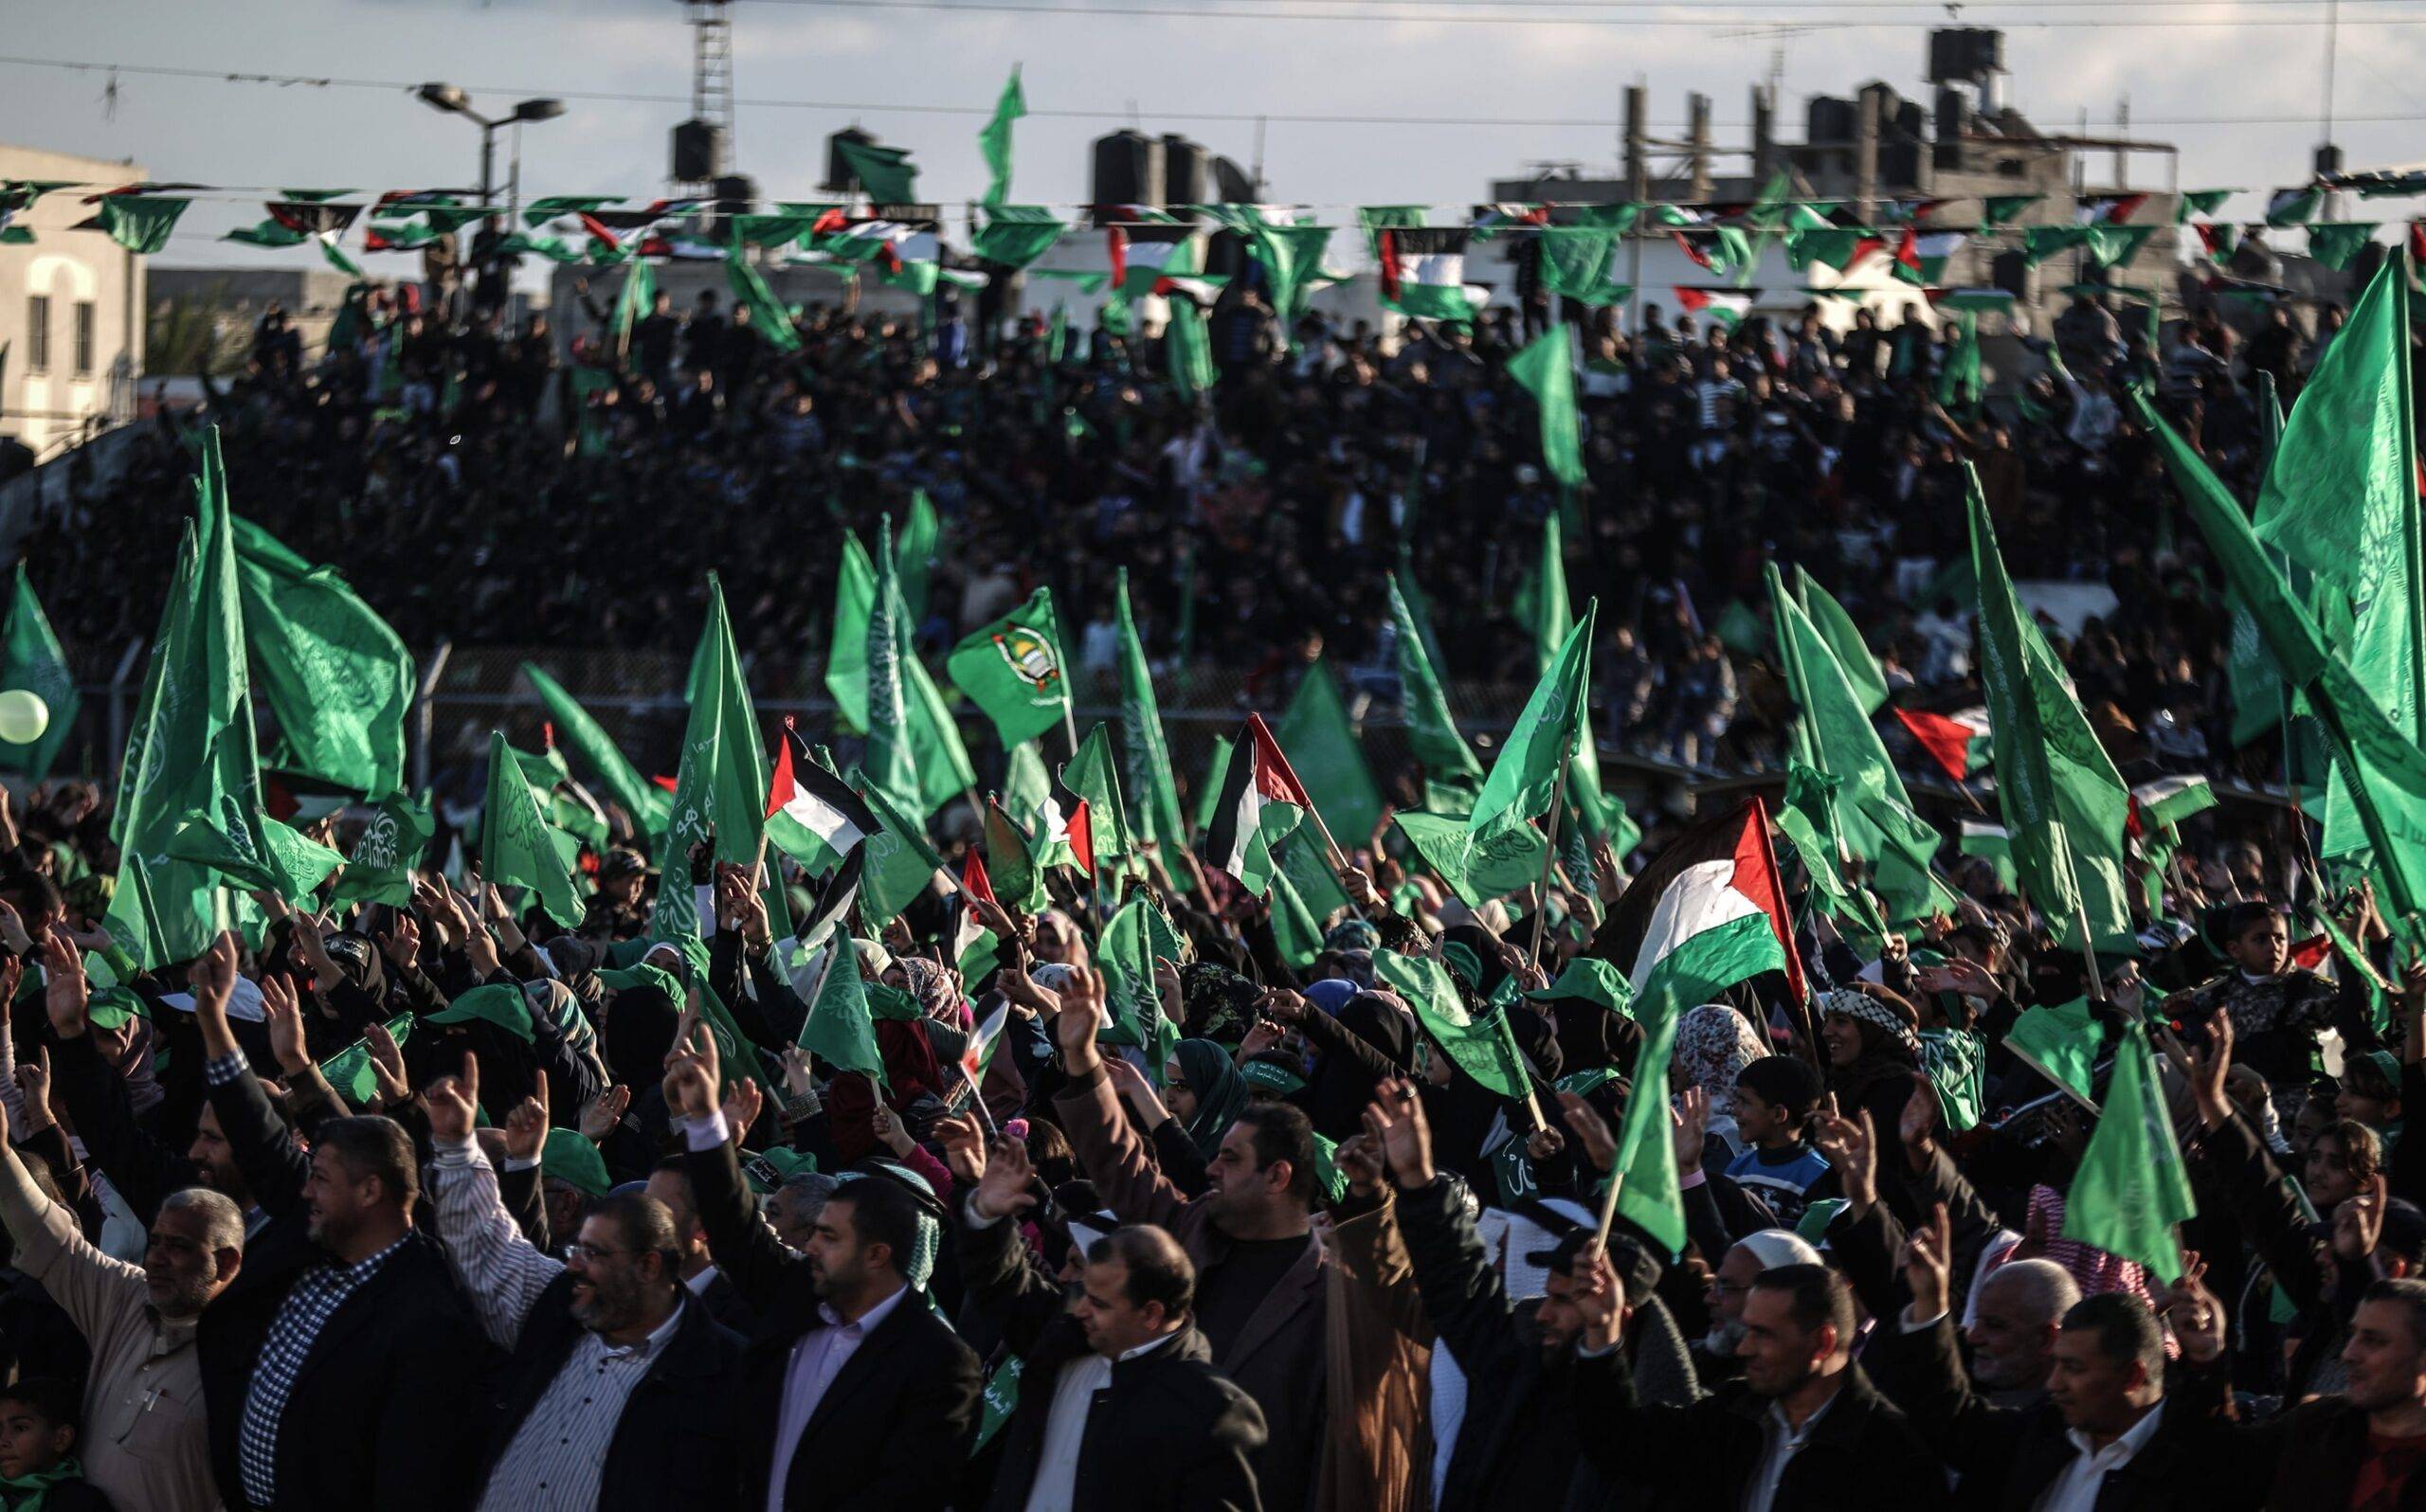 Thousands of people gather to celebrate the 29th anniversary of the foundation of Hamas in Khan Yunis, Gaza on December 11 2016 [Ali Jadallah / Anadolu Agency]